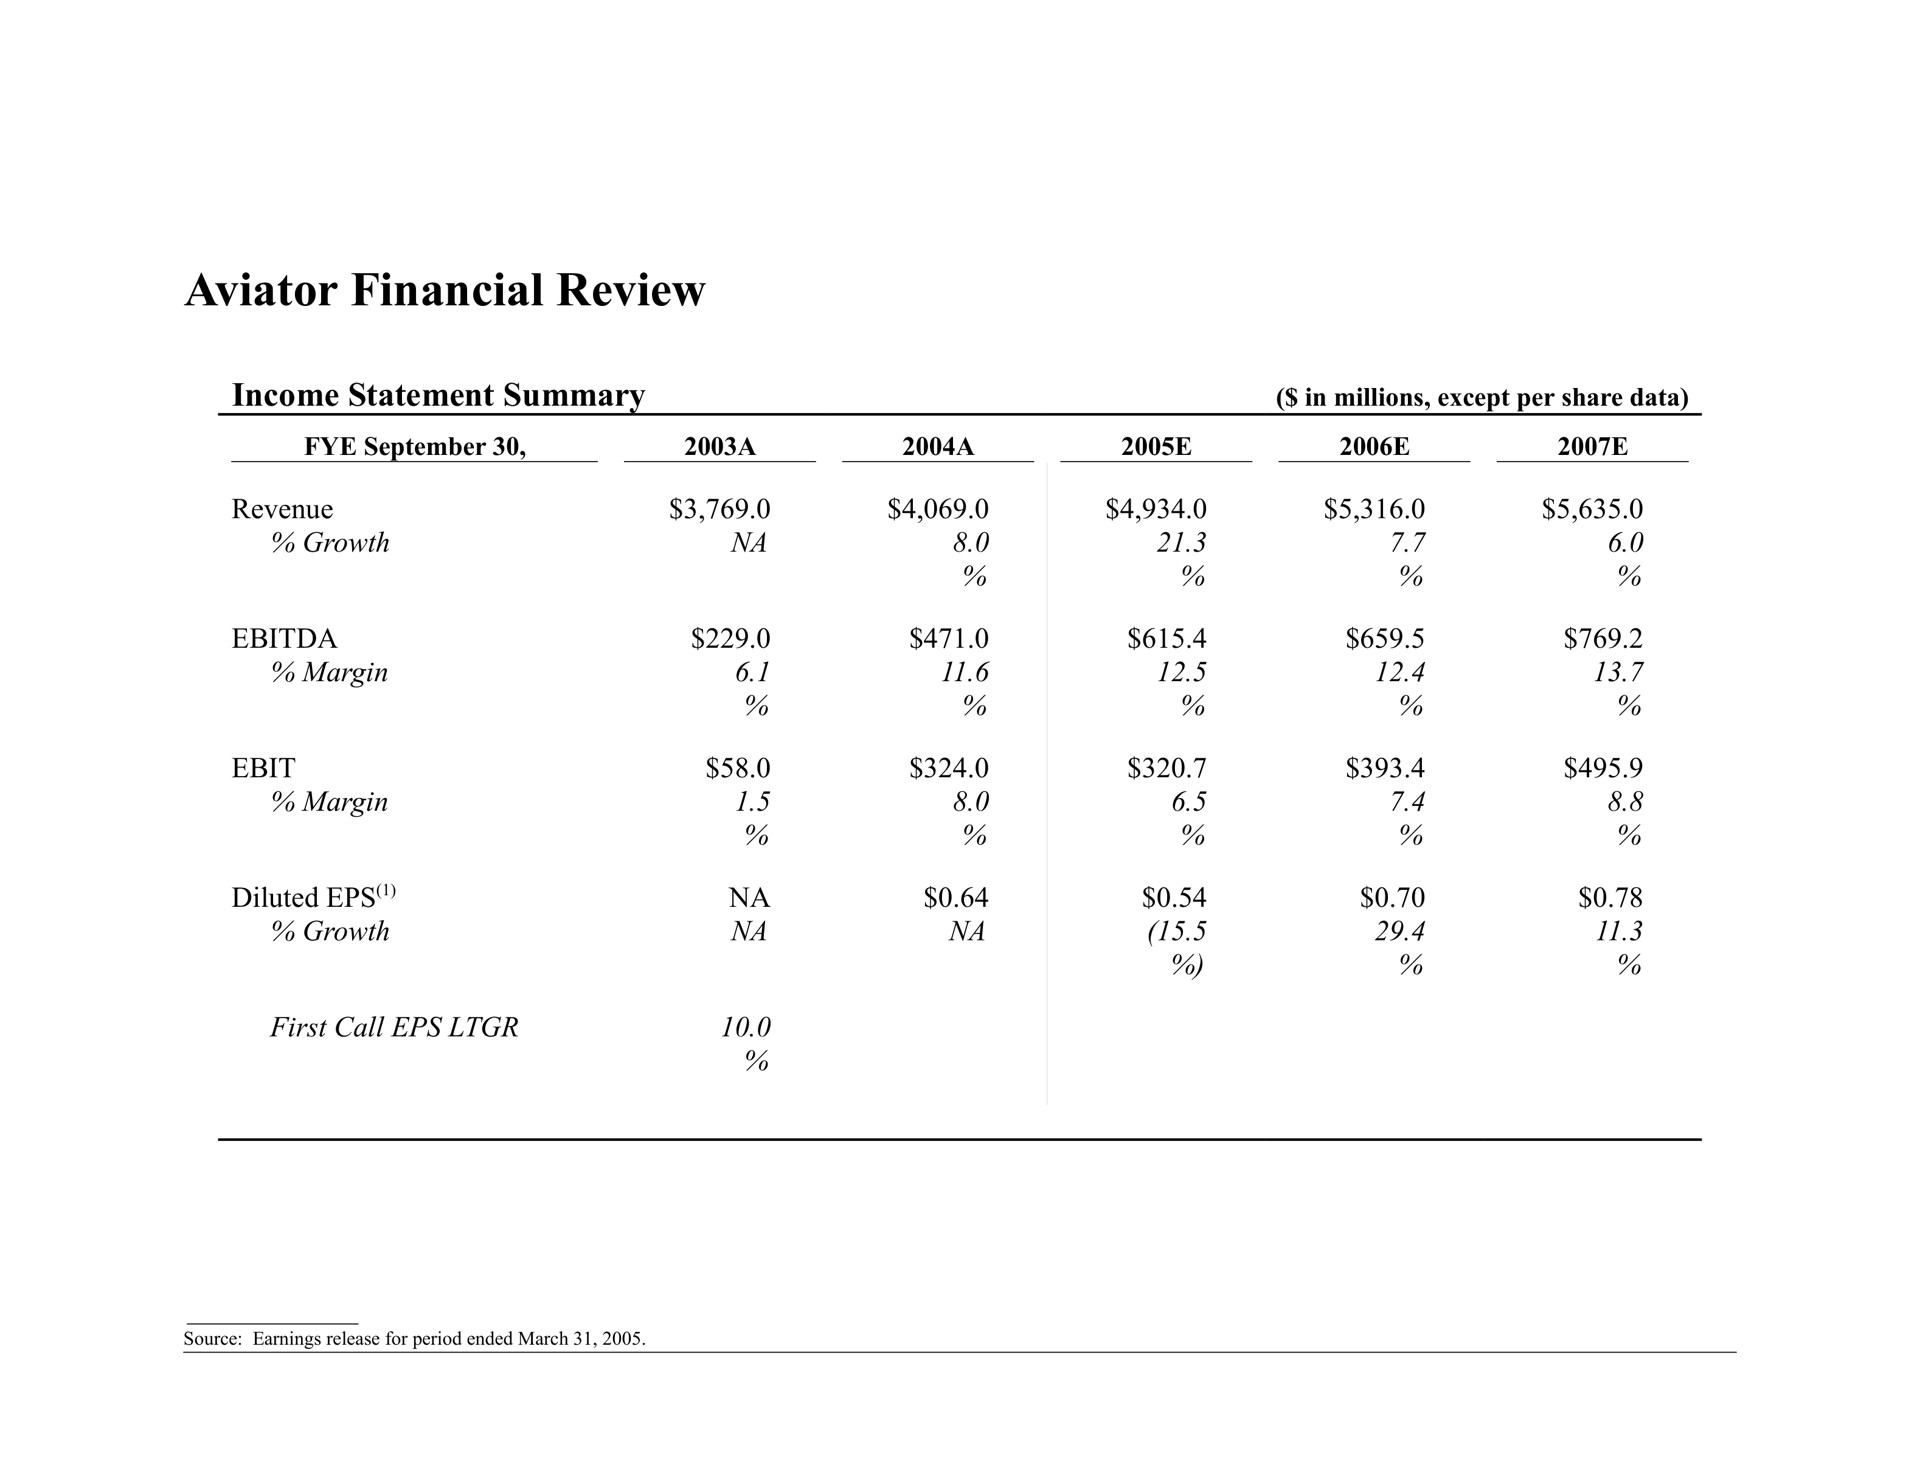 aviator financial review income statement summary | Bear Stearns